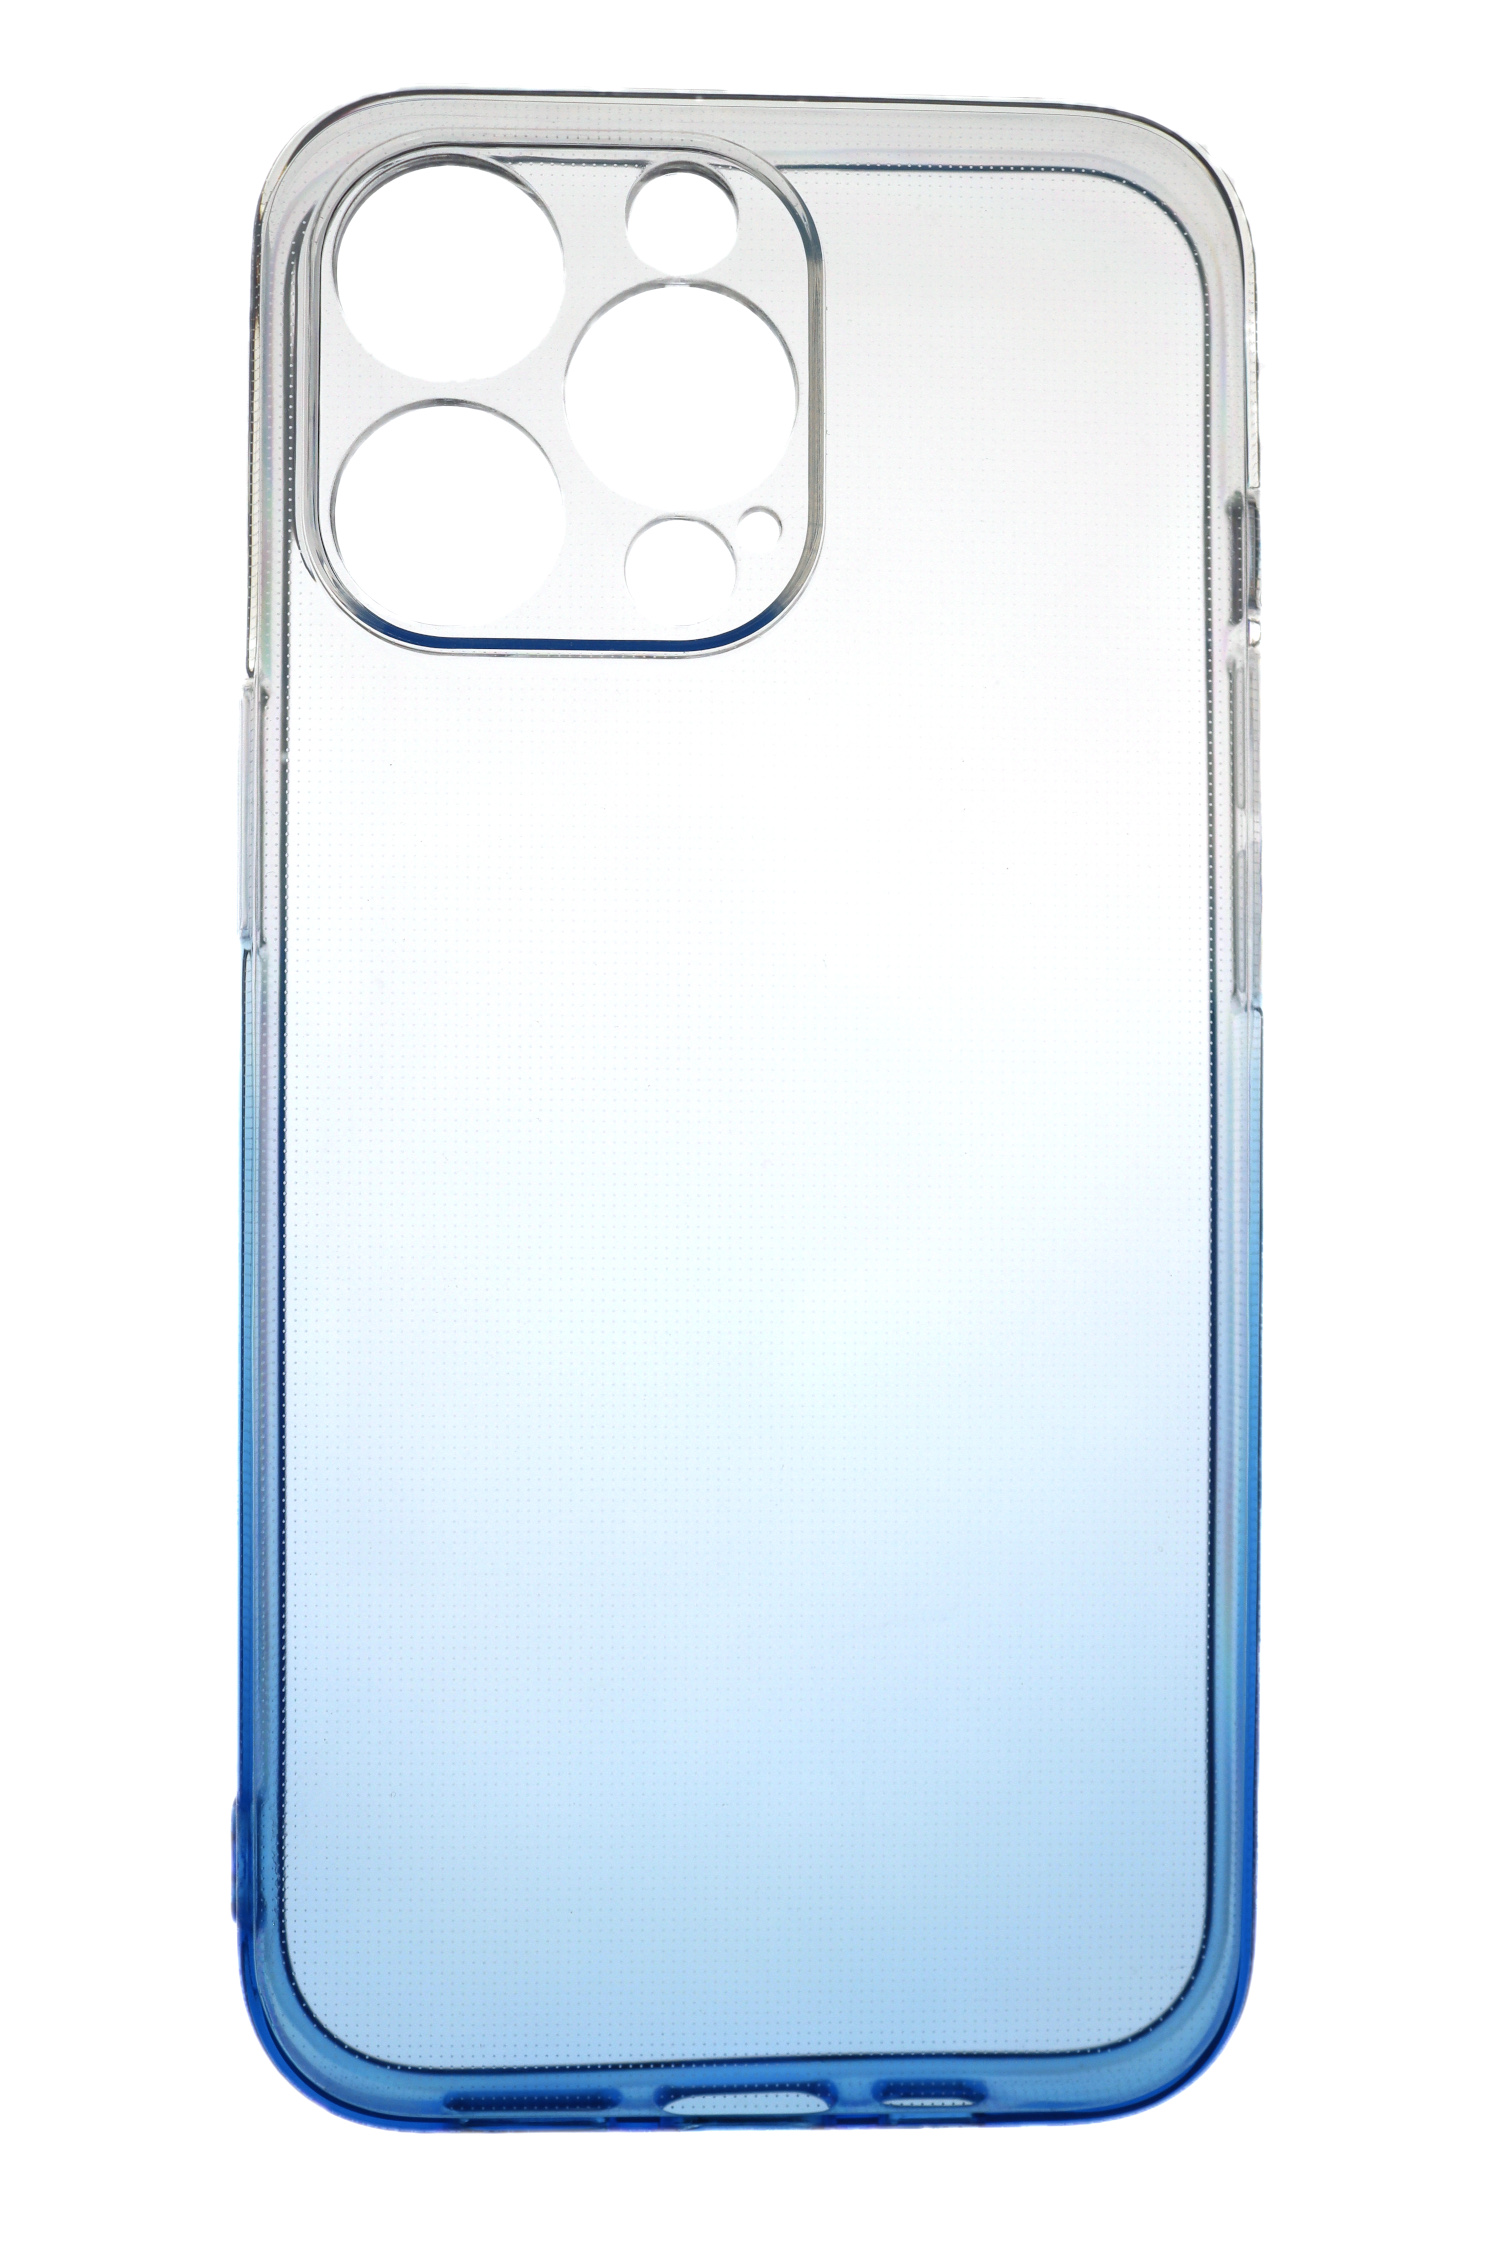 JAMCOVER 2.0 mm TPU Blau, Transparent 14 Strong, iPhone Case Backcover, Pro, Apple